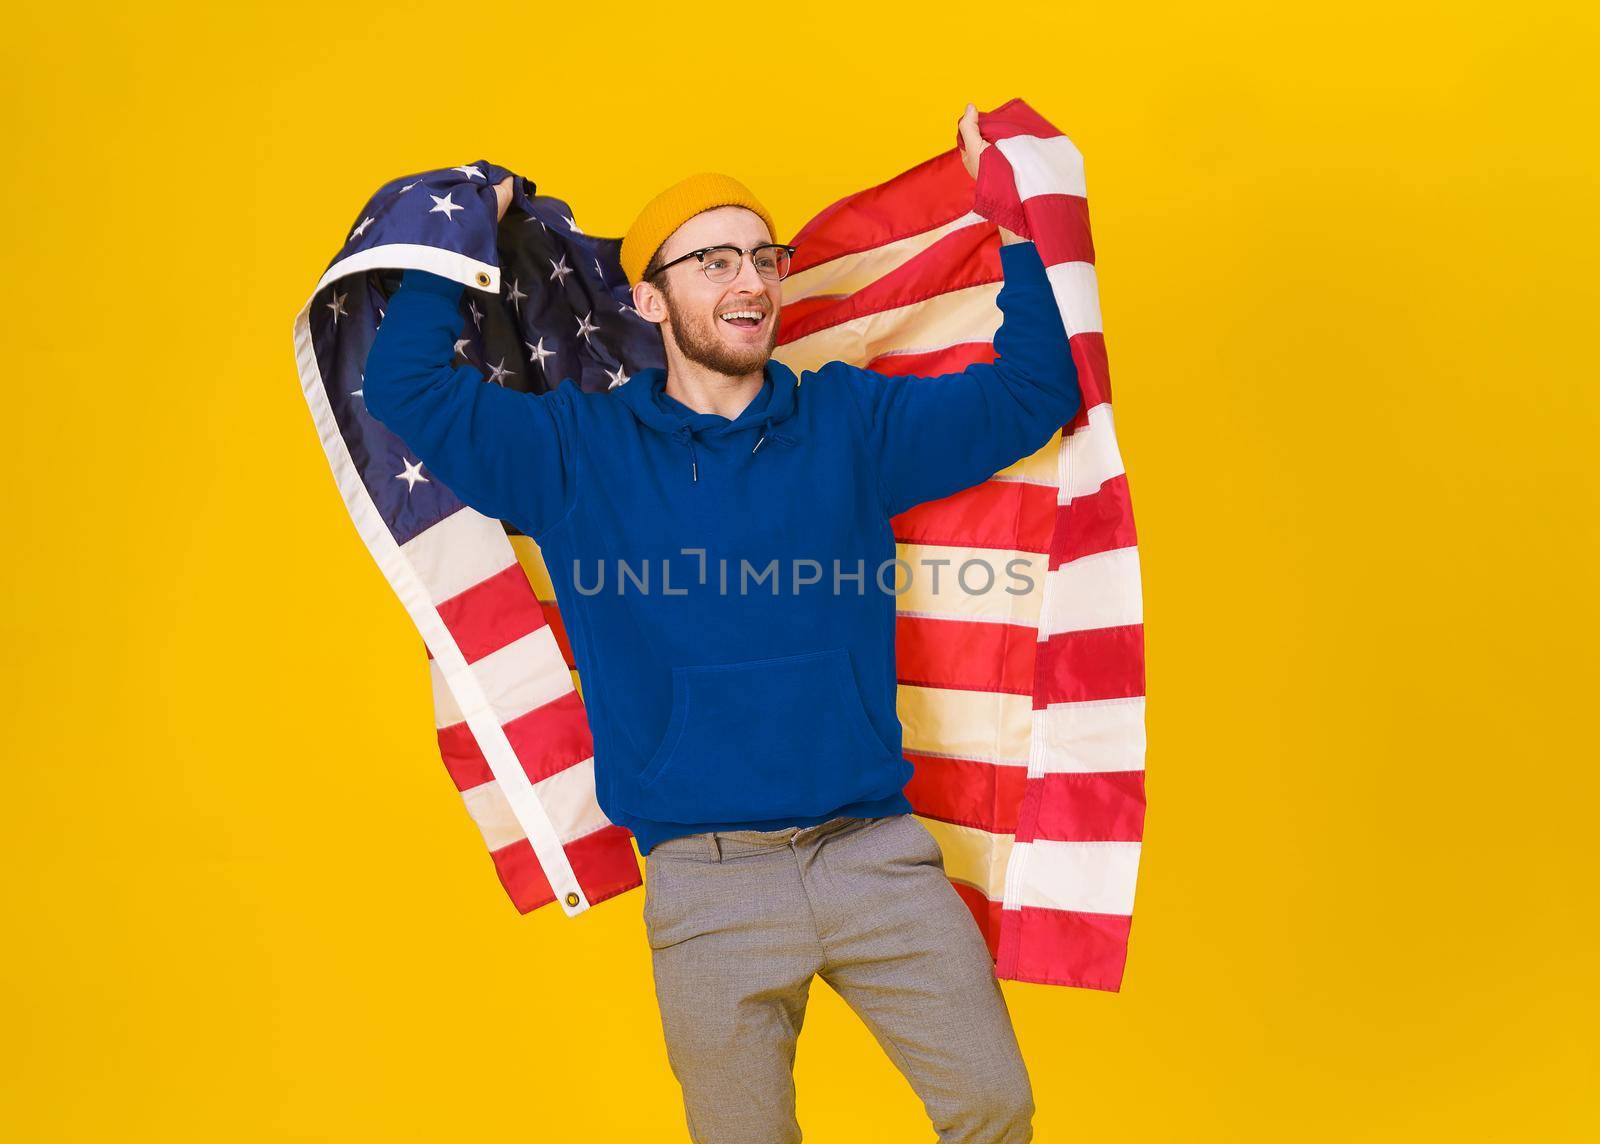 Handsome caucasian young man celebrates 4th of july in blue hoodie and USA flag behind his back isolated on yellow background. Freedom is in your life. Cheerful young man with American flag.